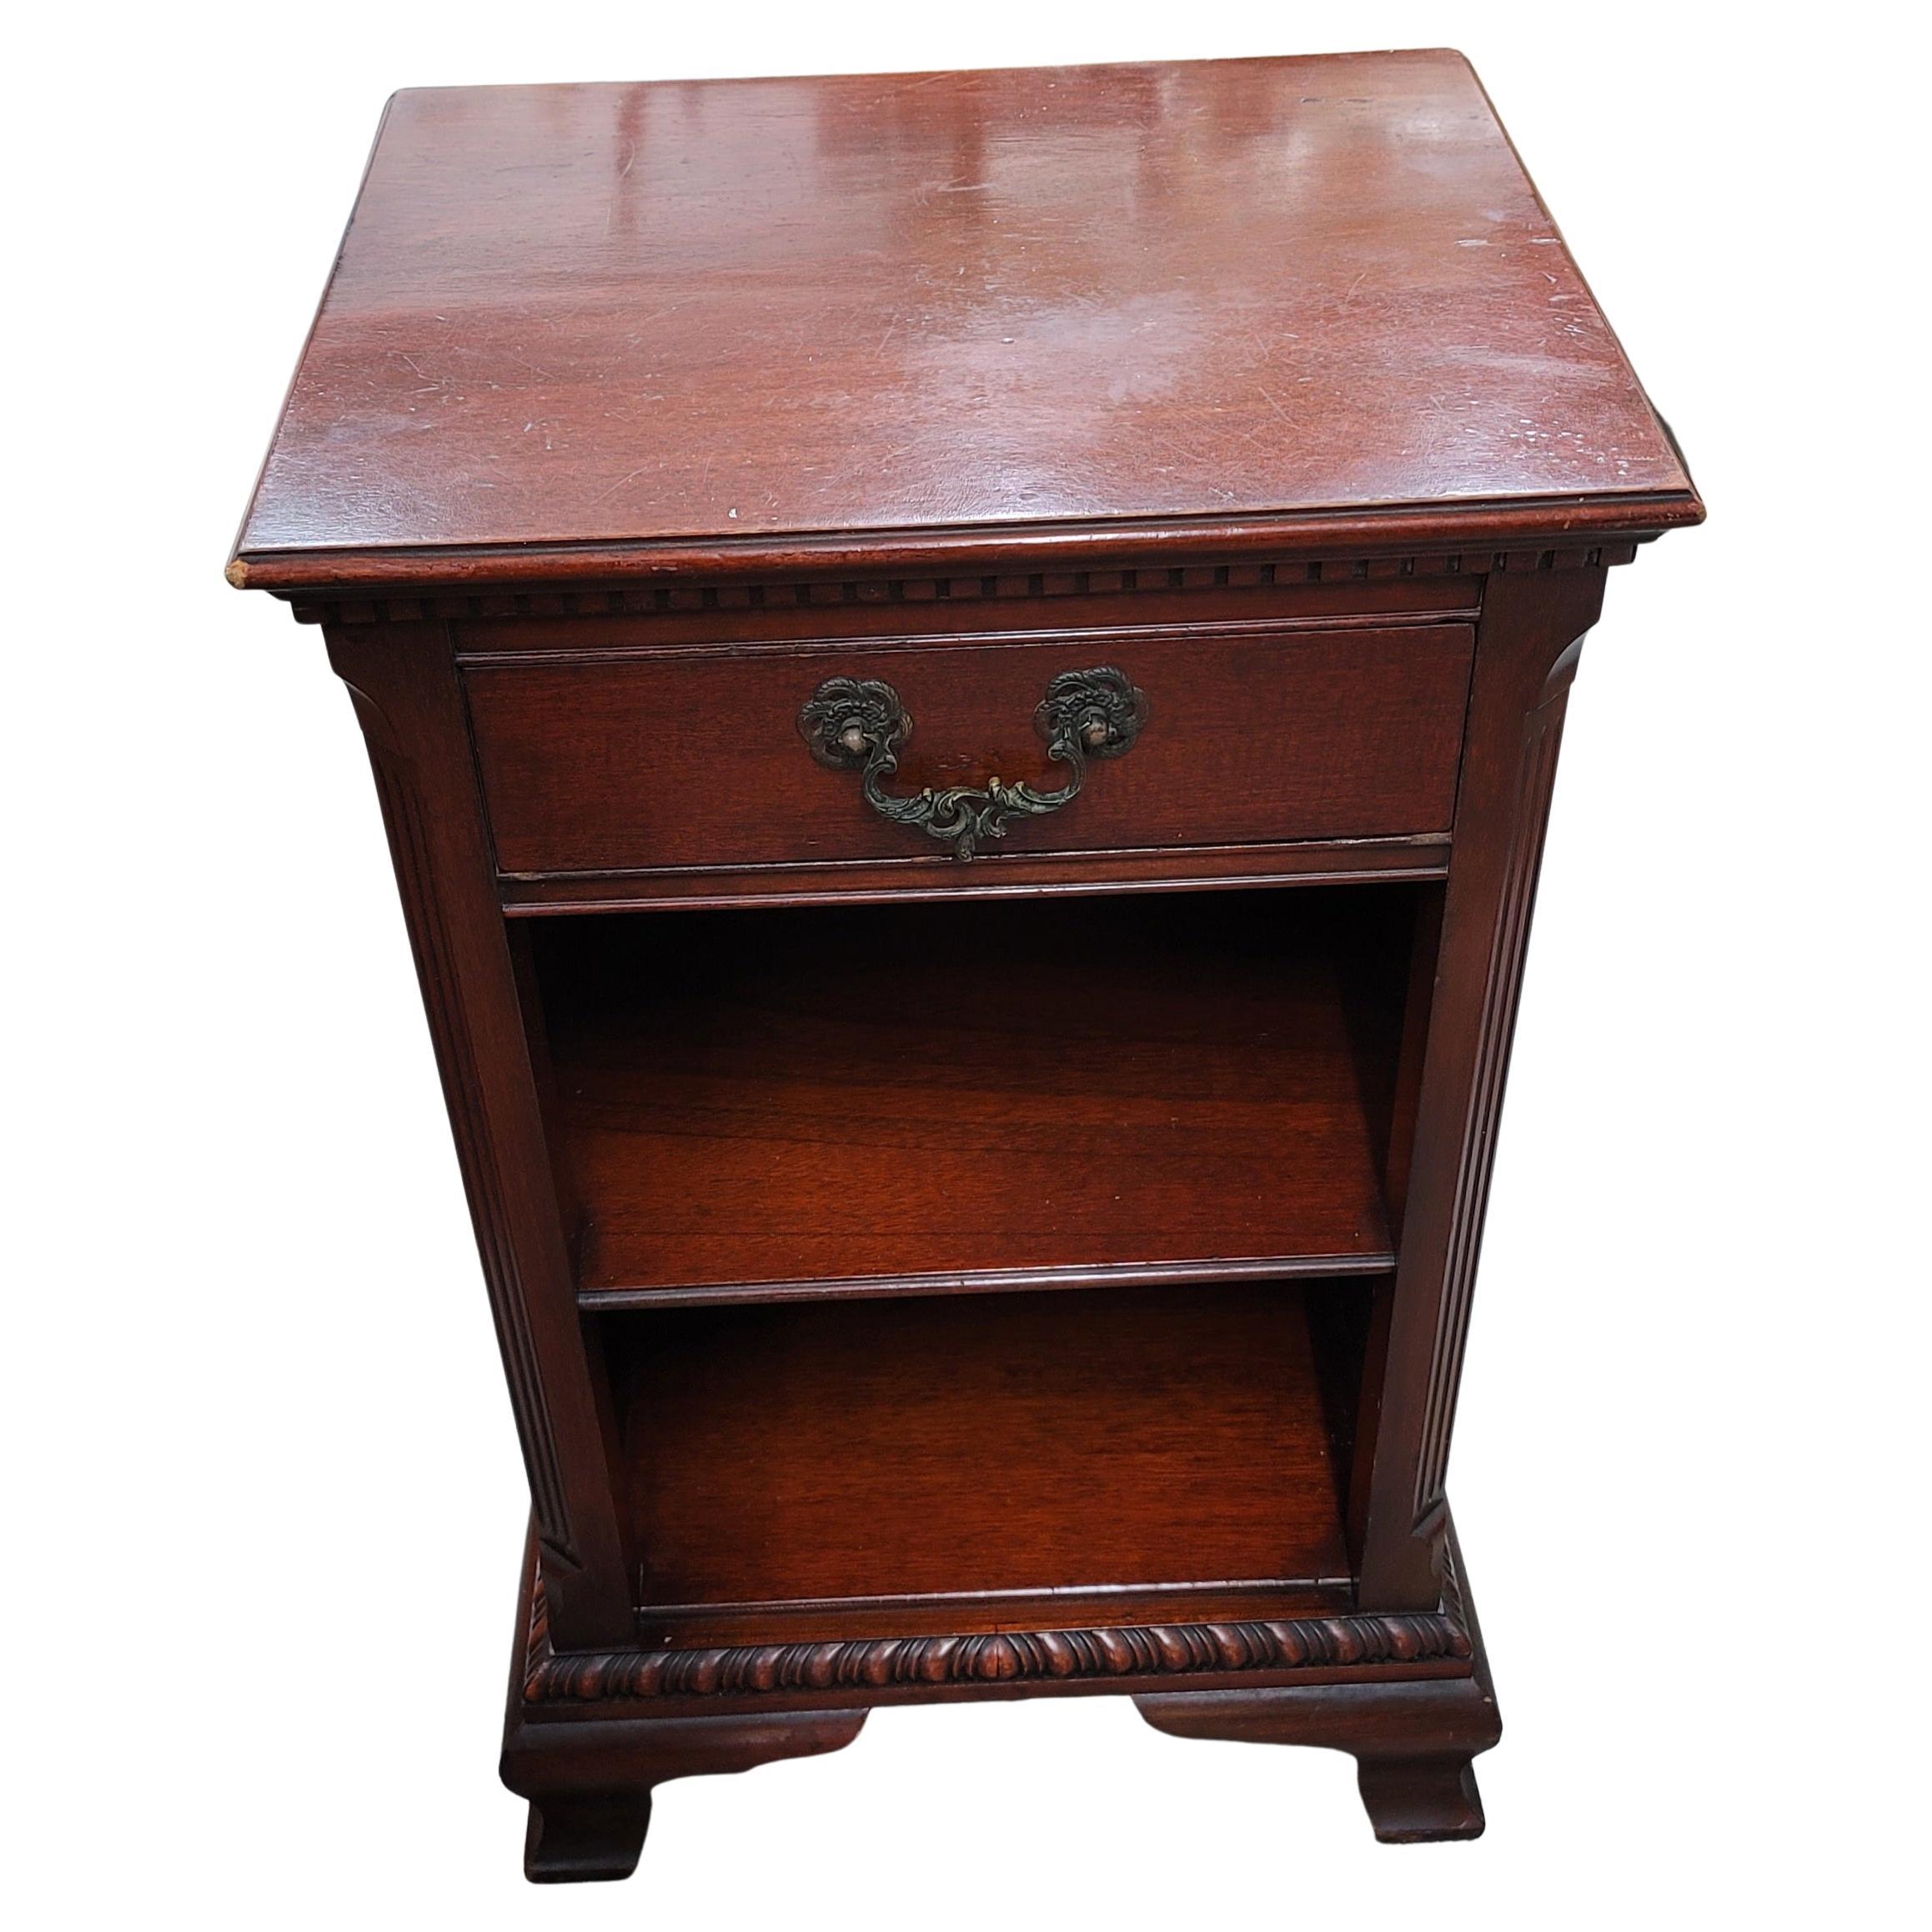 The Wentworth House Group Collection Georgian Mahogany night stand bed side table by Drexel.
Exceptional workmanship display throughout. Good vintage condition, with some scratches on top, appropriate with history and use.
Measures 18